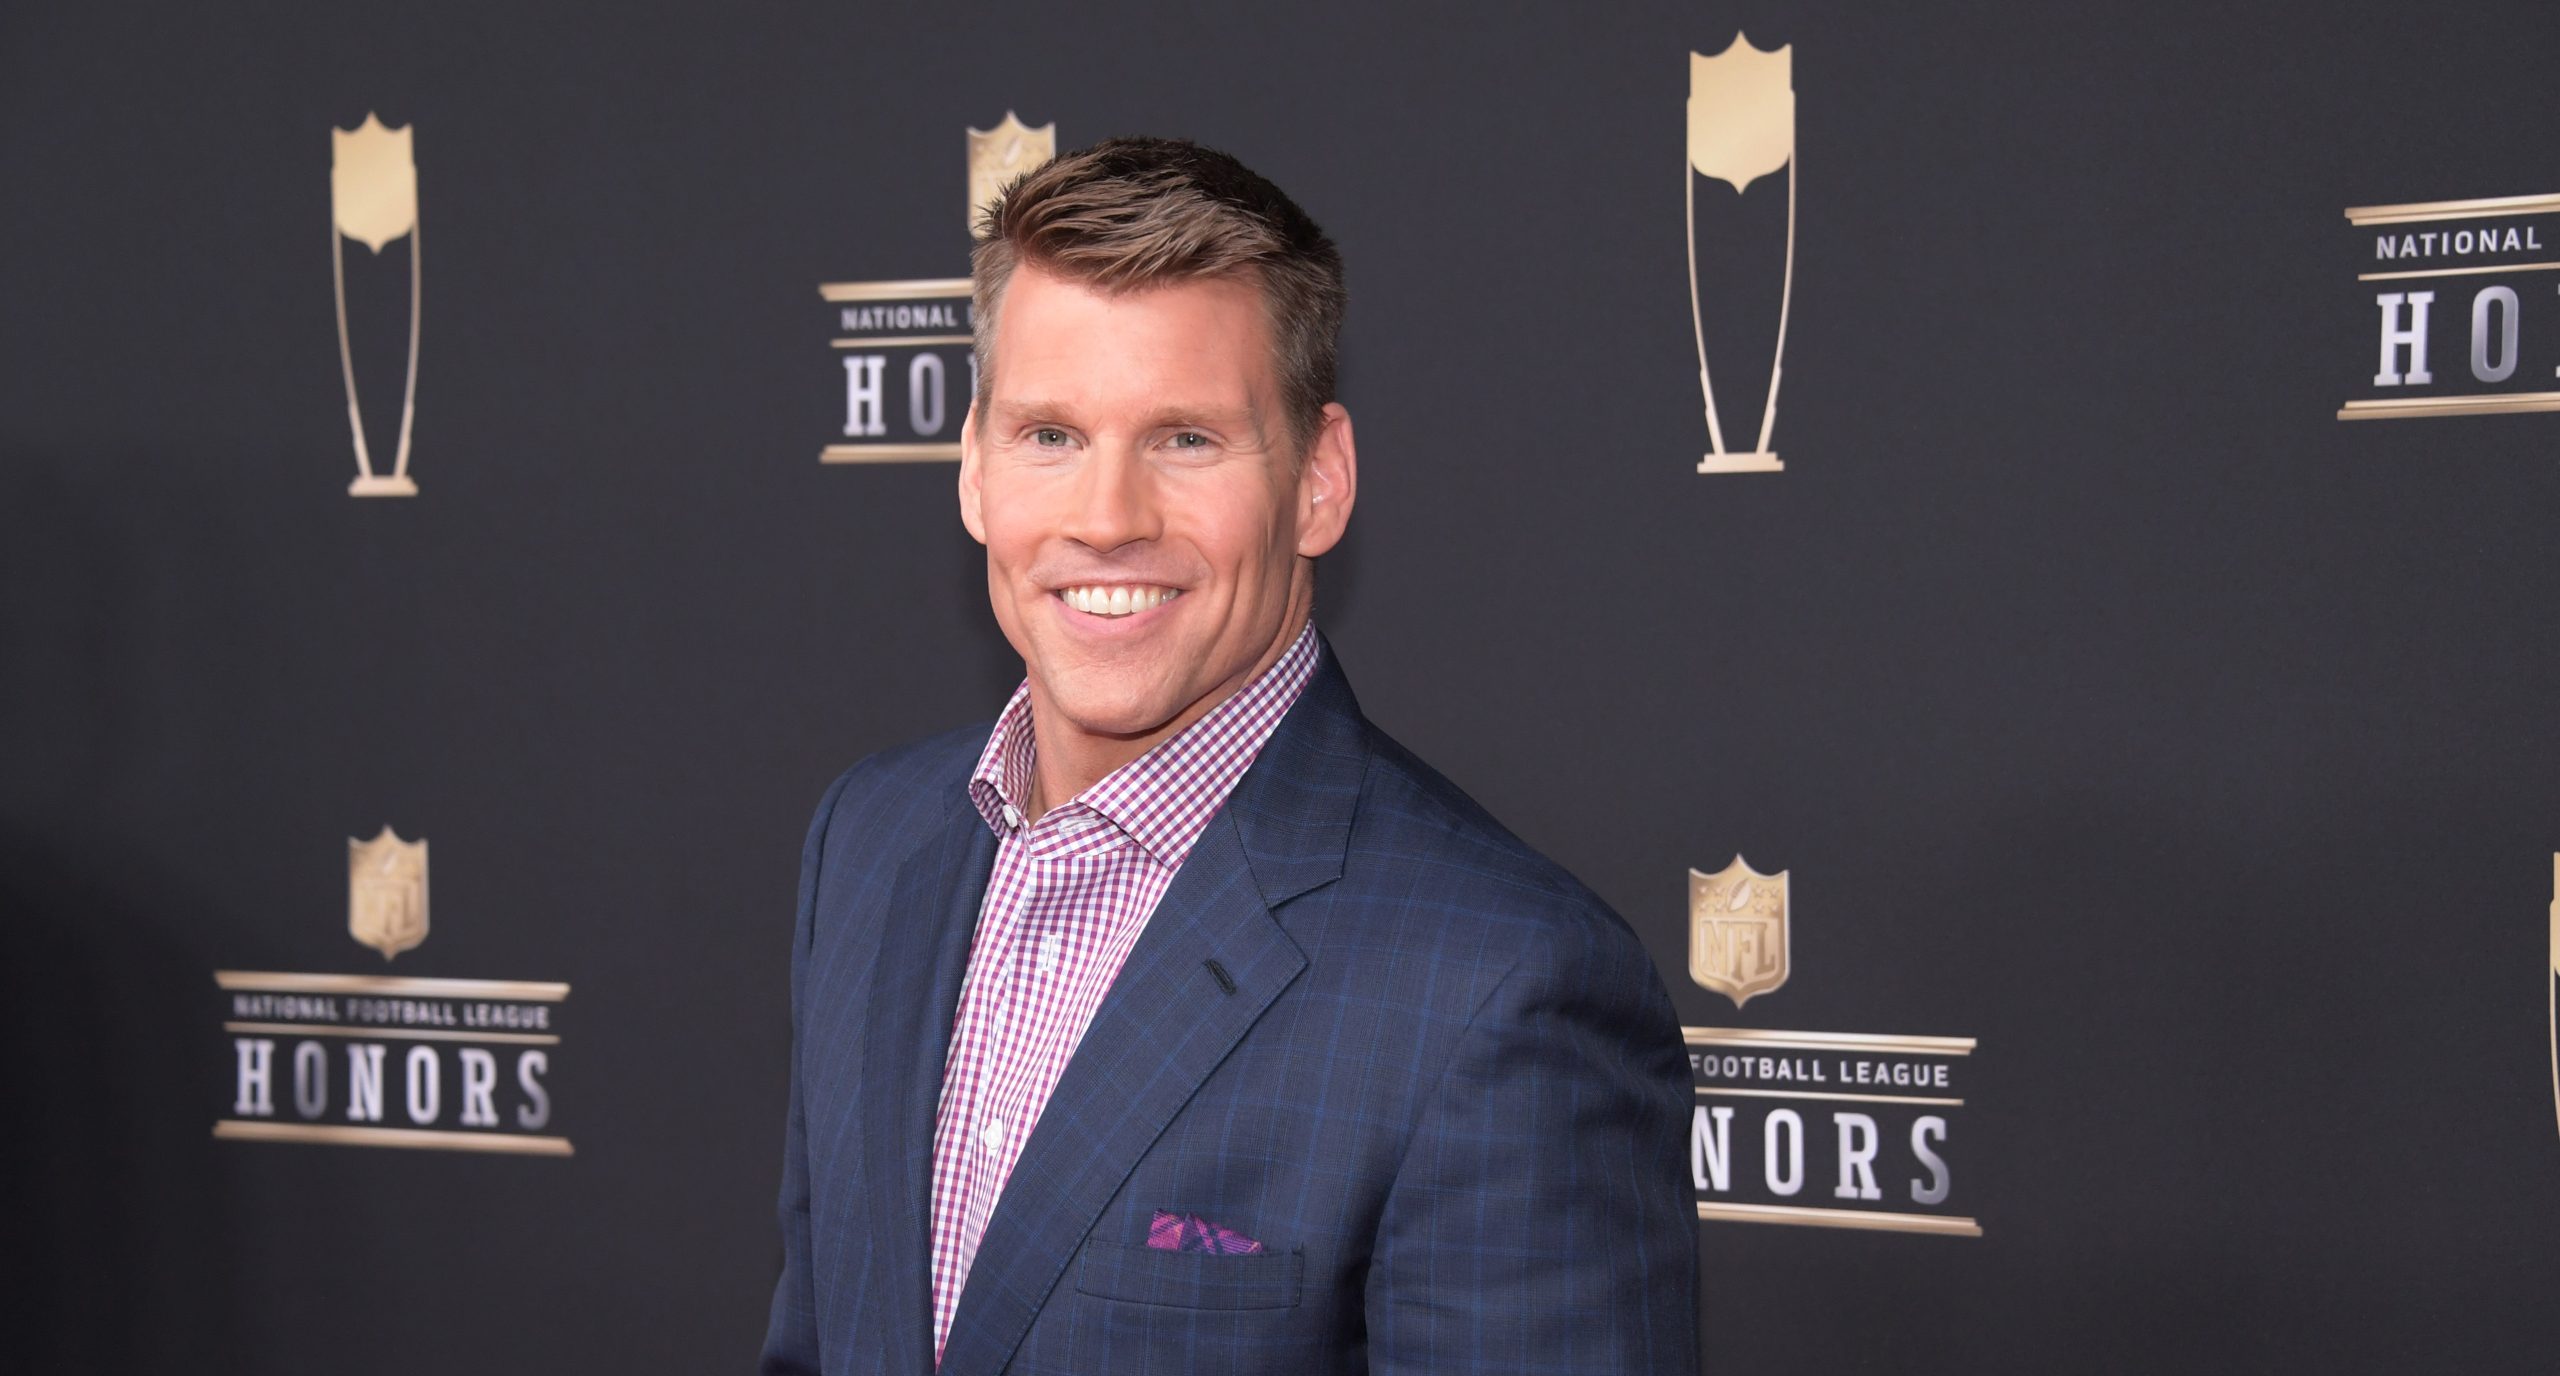 RedZone’s Scott Hanson gives bad information about Raiders-Seahawks broadcast